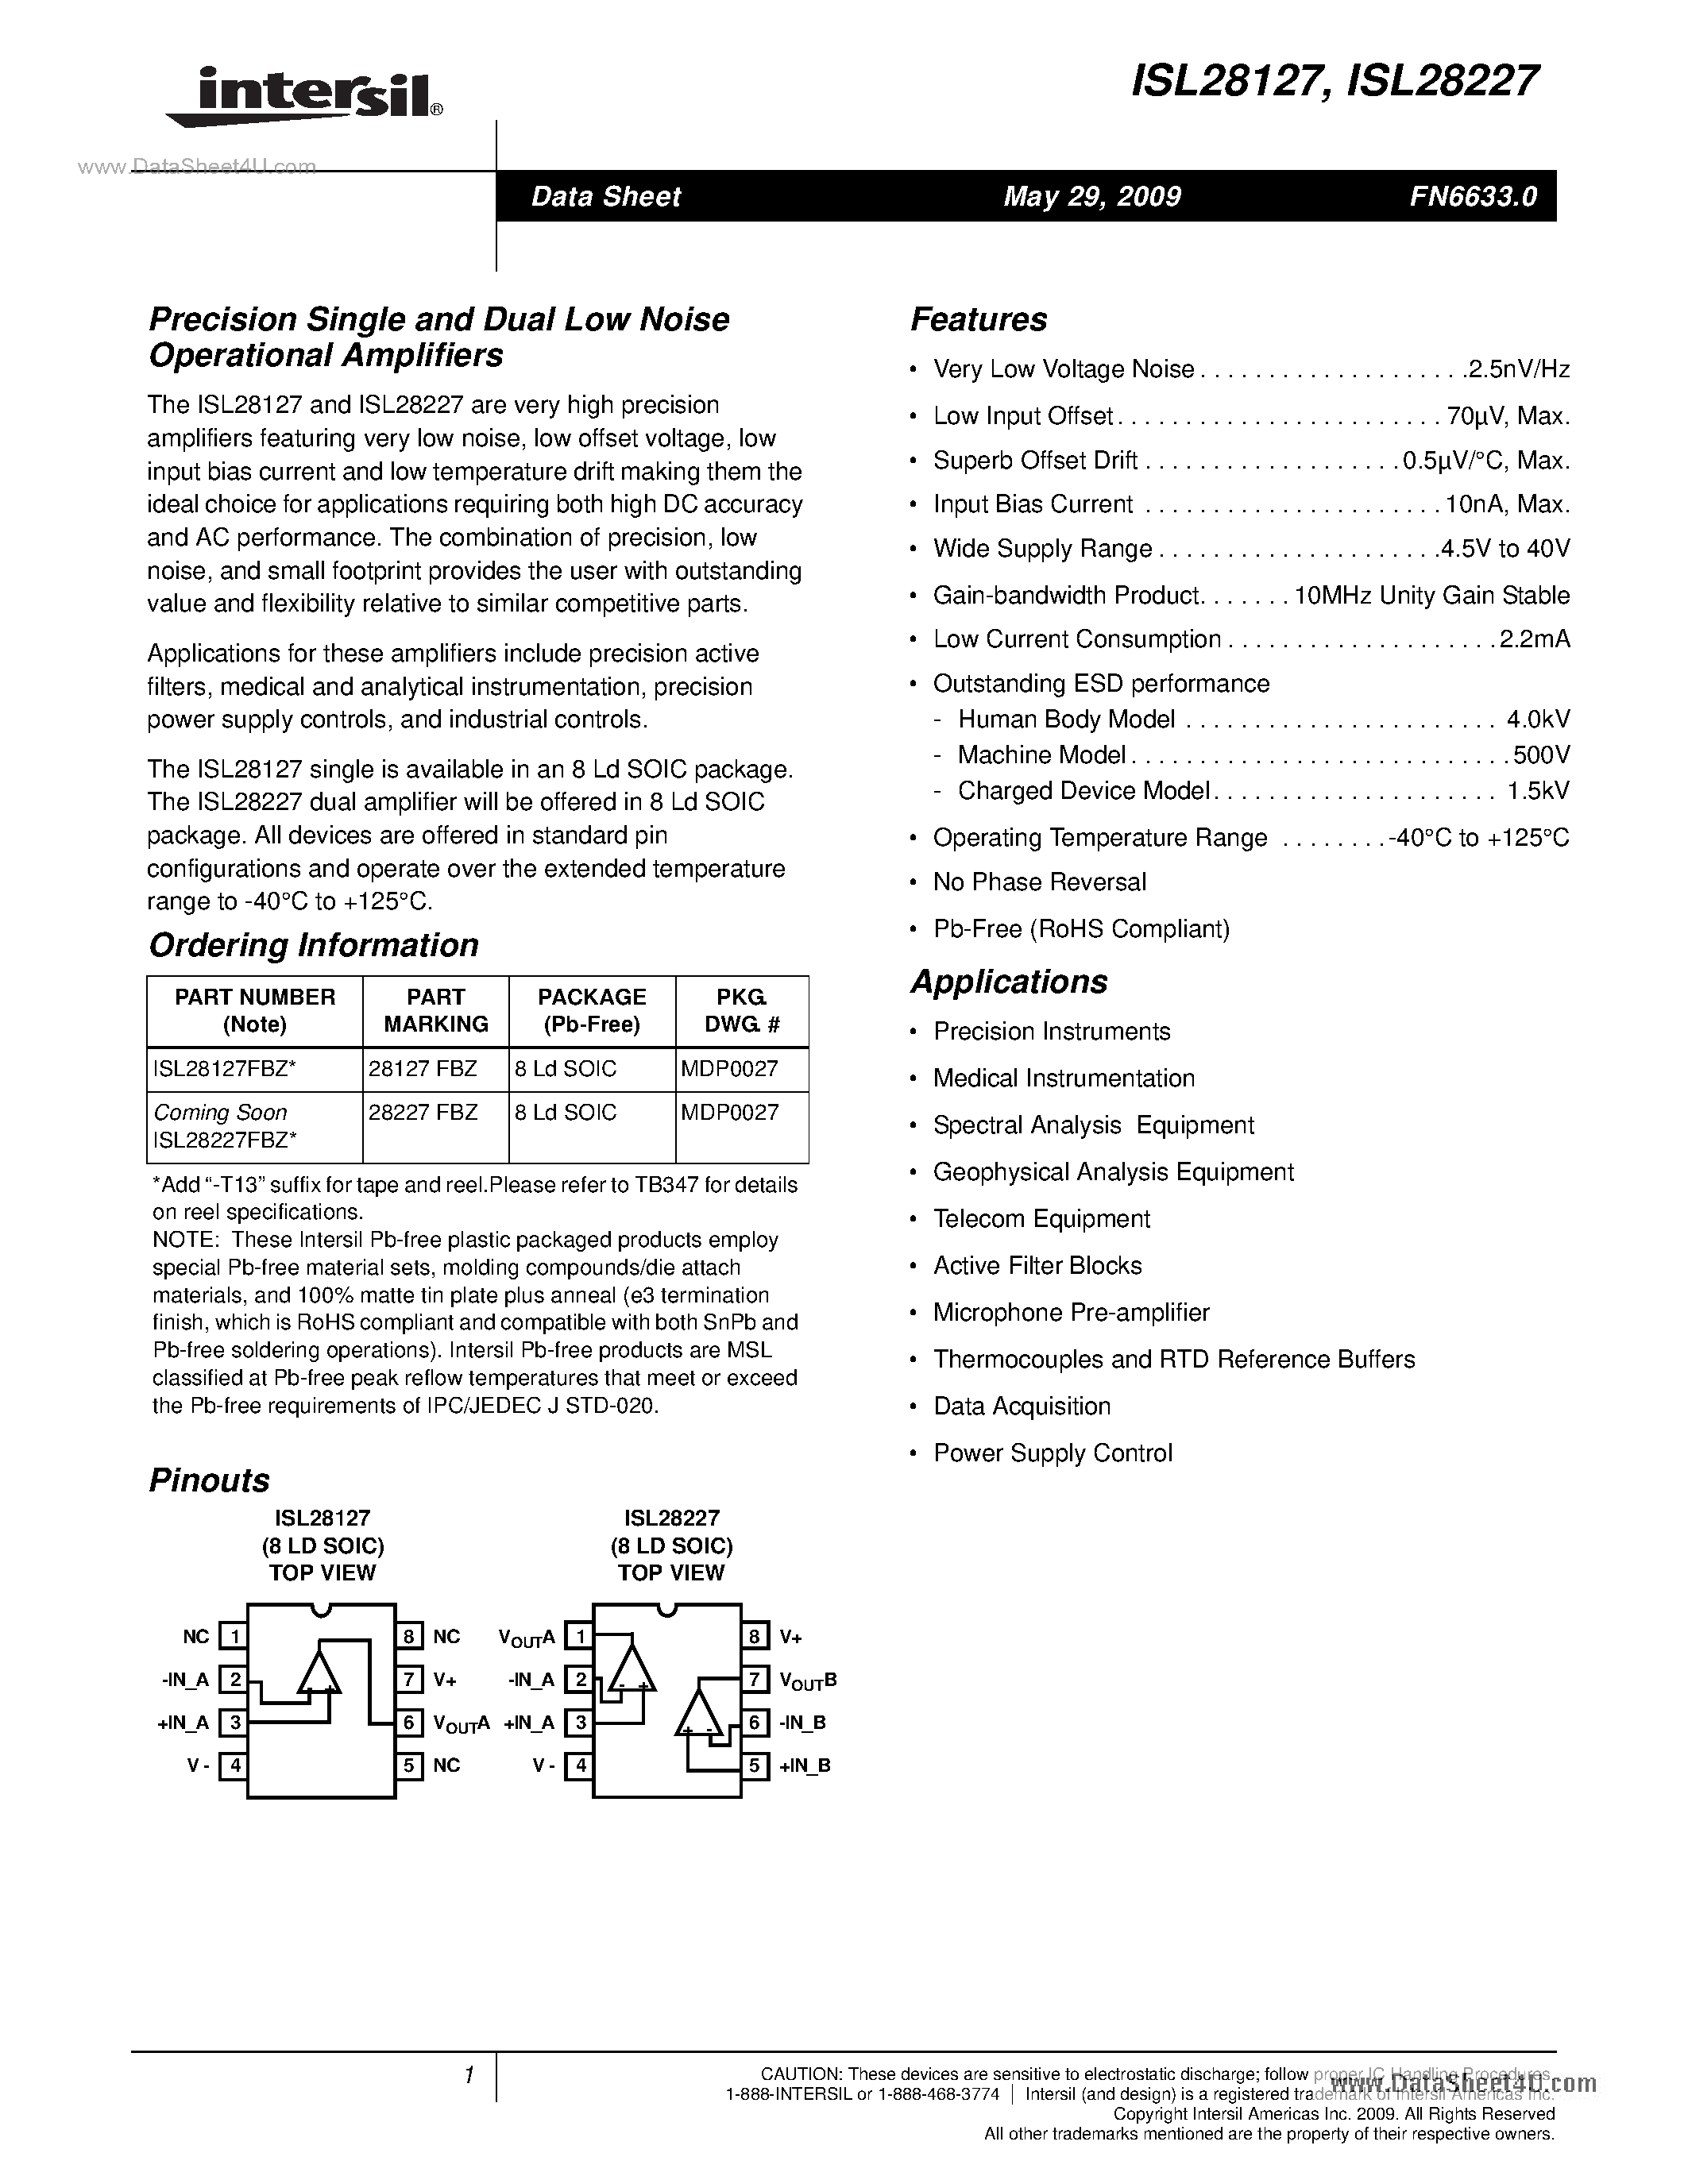 Datasheet ISL28227 - (ISL28127 / ISL28227) Precision Single And Dual Low Noise Operational Amplifiers page 1